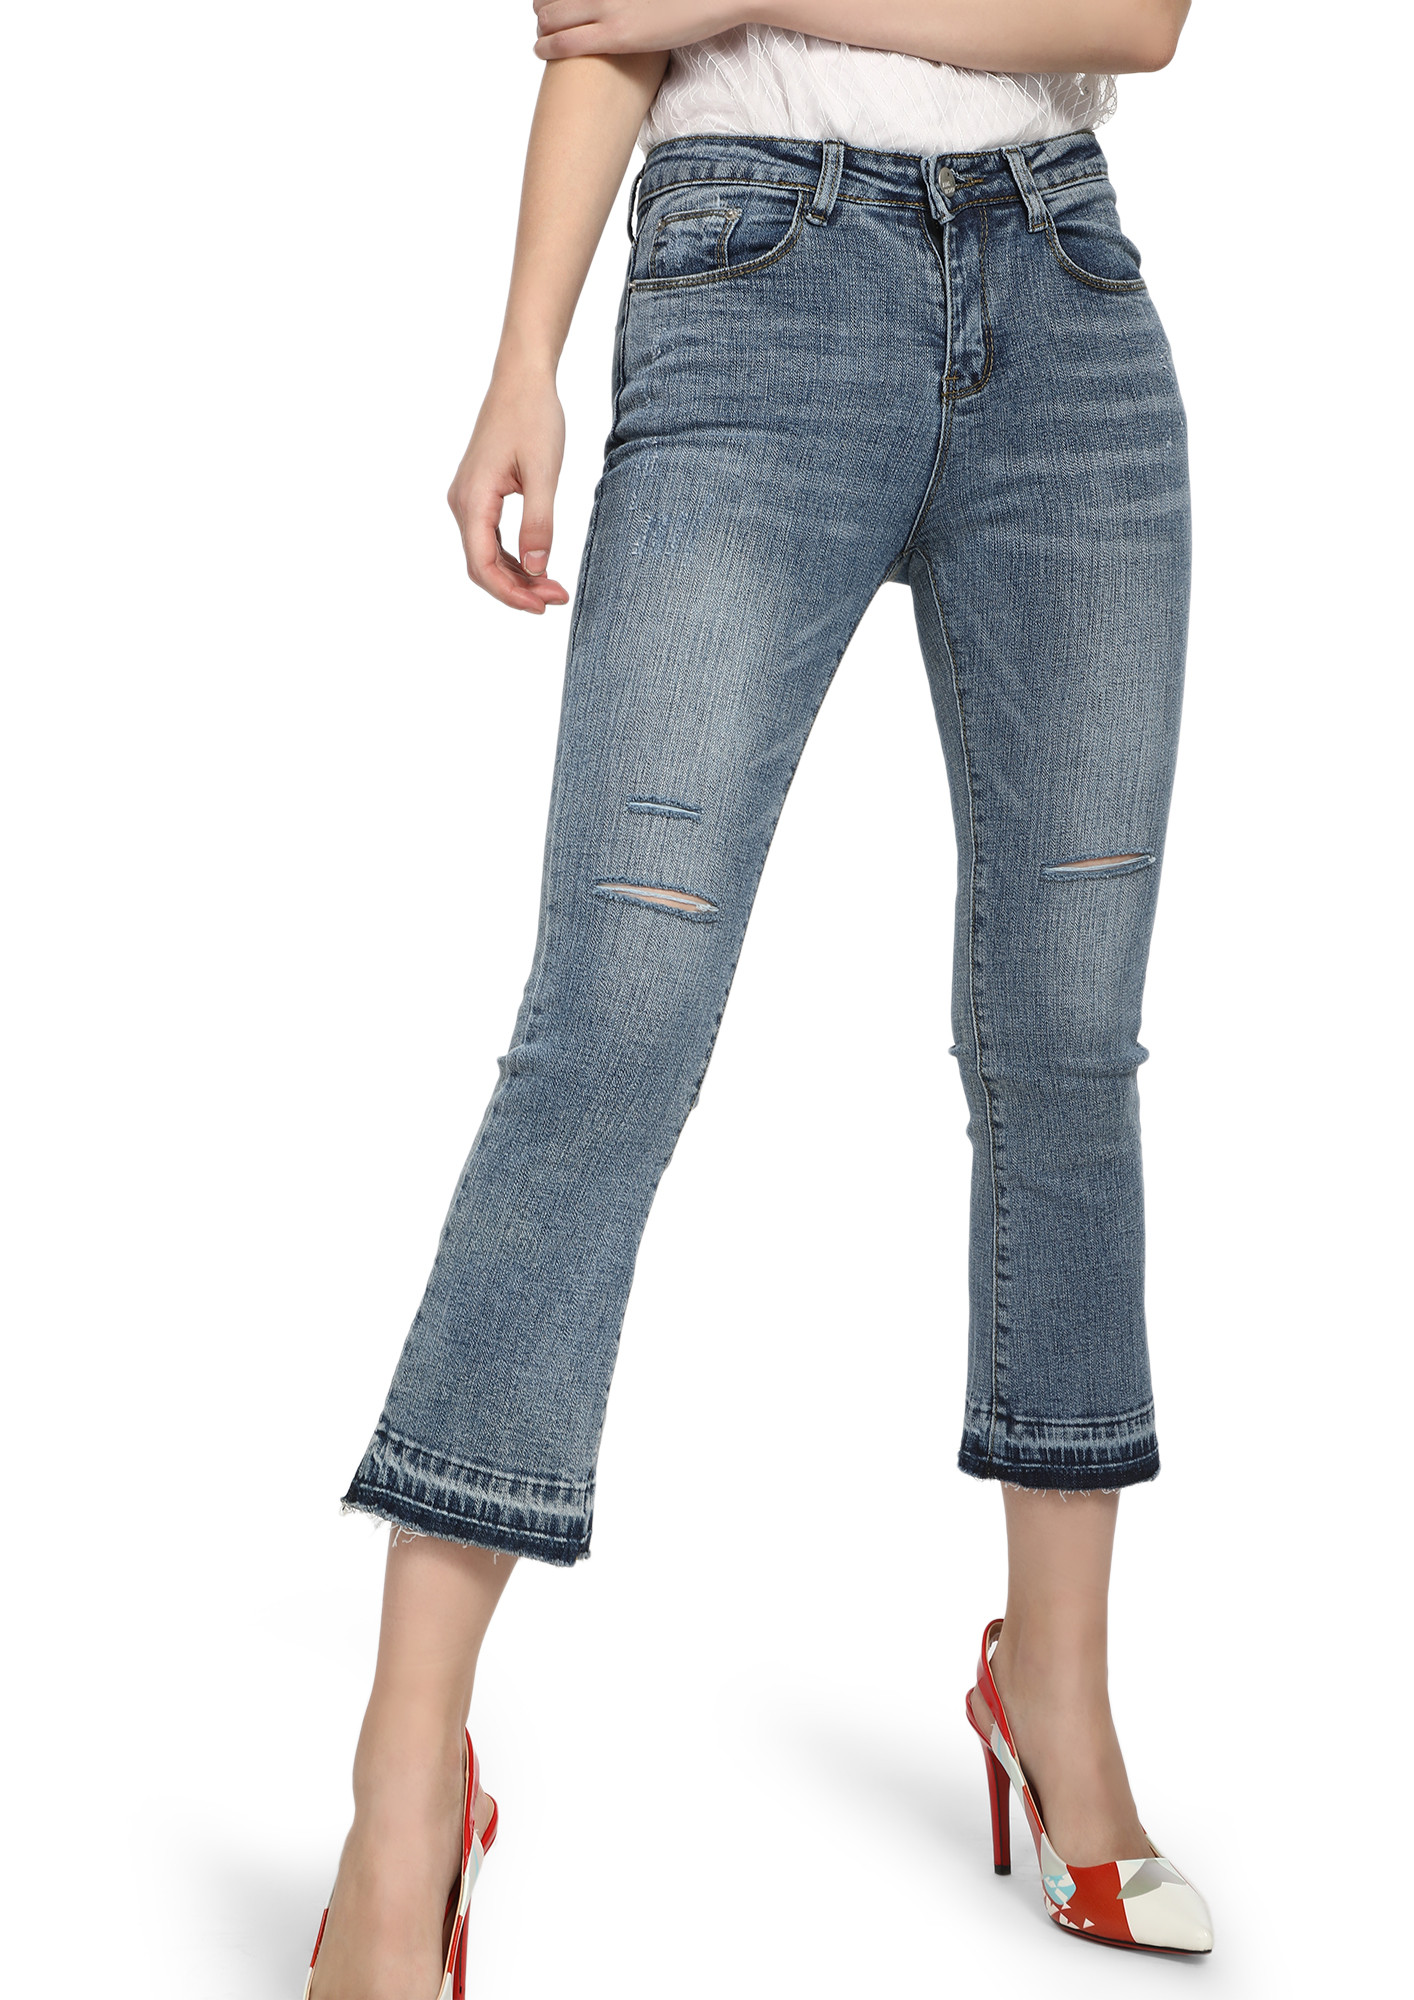 CUT SHORT THE INCHES BLUE CROPPED JEANS